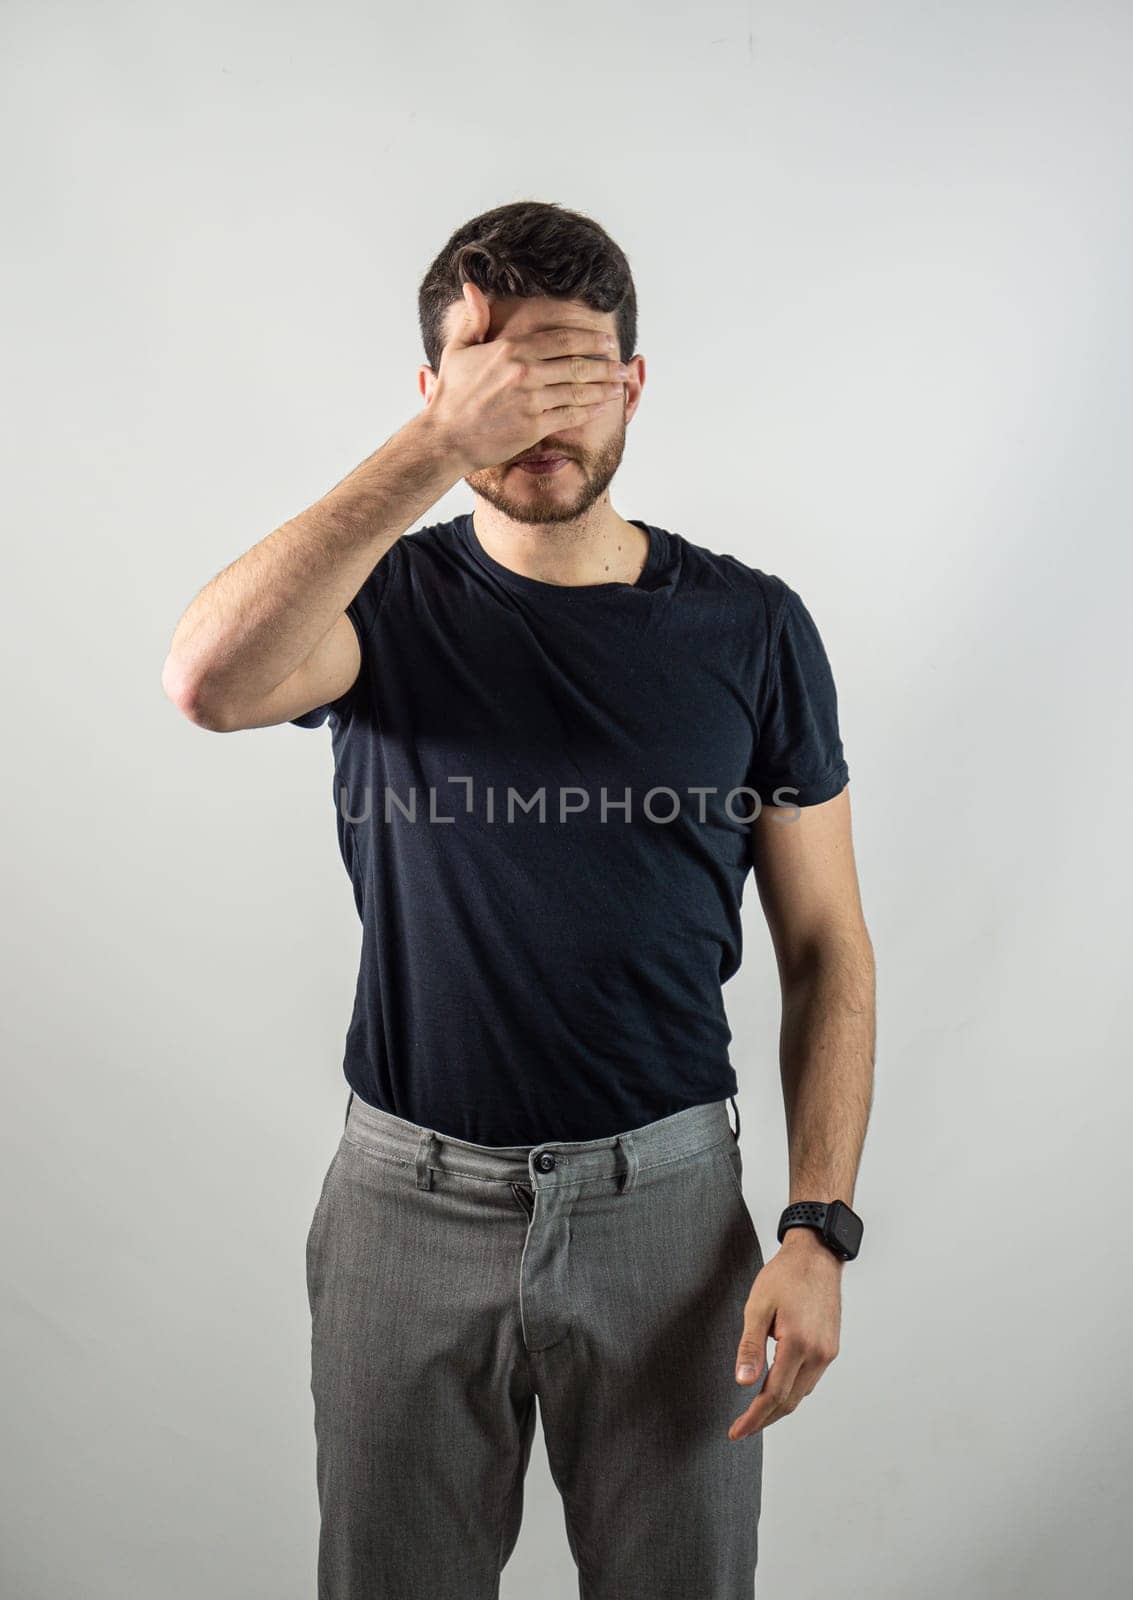 Attractive young man covering eyes with his hands in studio shot. Secret concept.